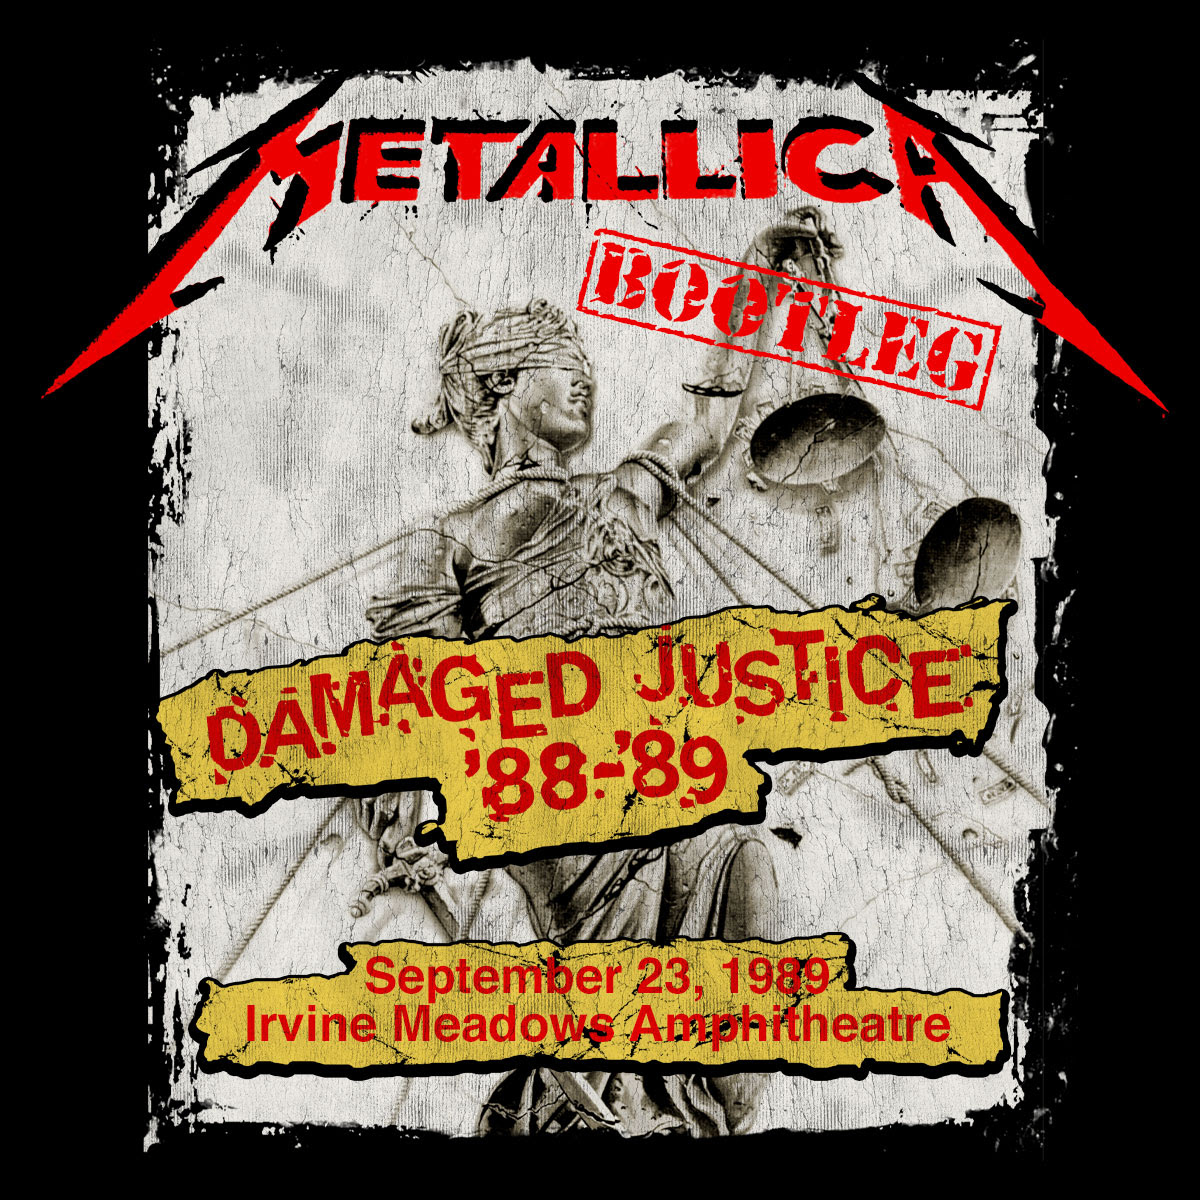 Watch Metallica Live in Irvine Tonight at 8 PM EDT / 5 PM PDT on YouTube & Facebook!